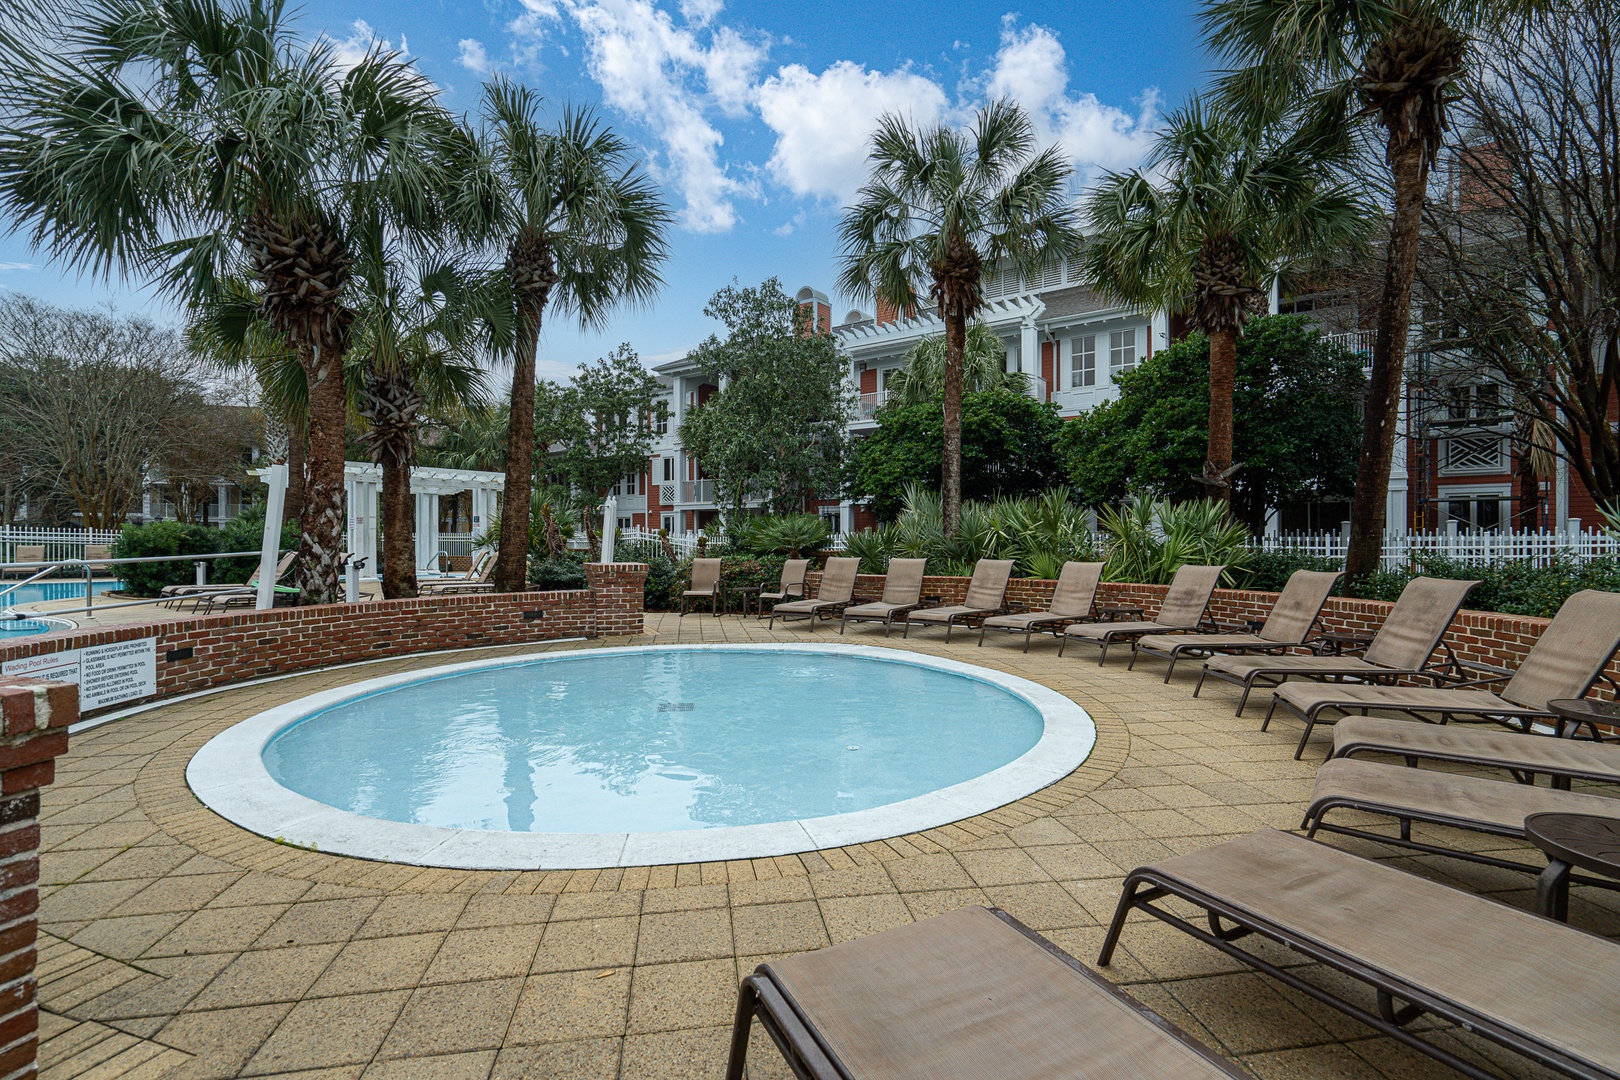 Lounge the day or make a splash at the sparkling communal pool